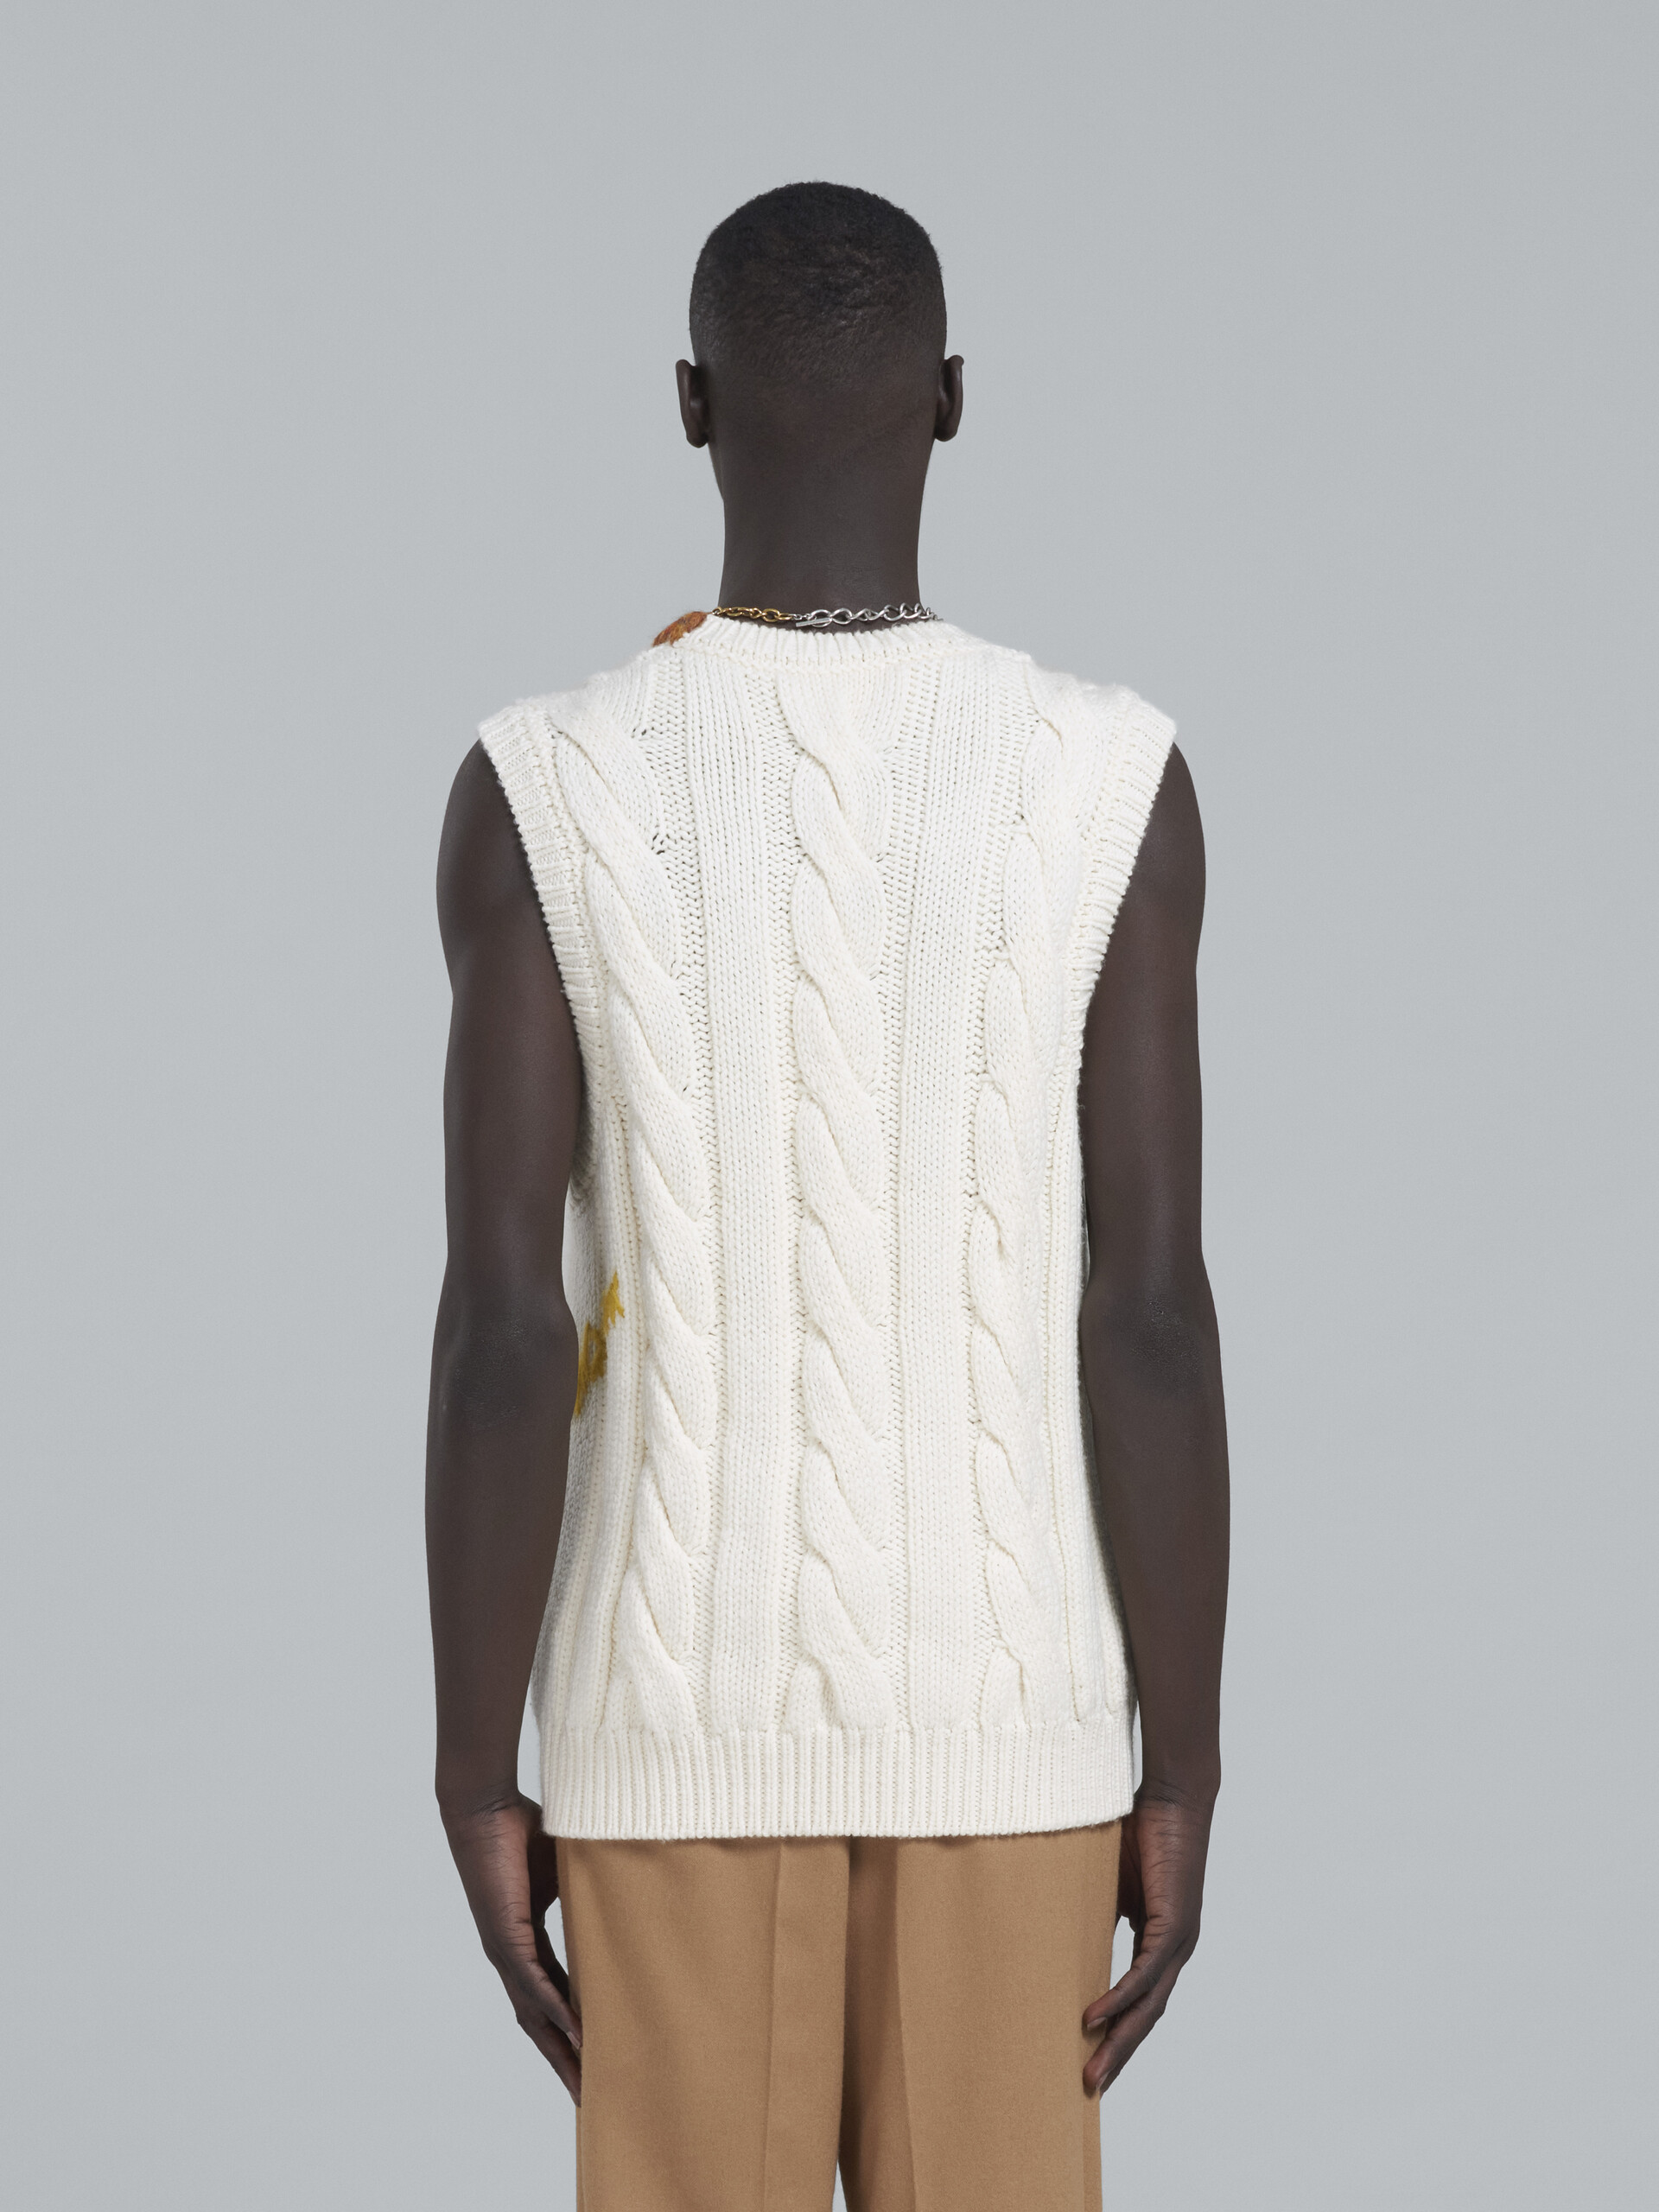 White cable-knit vest - Pullovers - Image 3